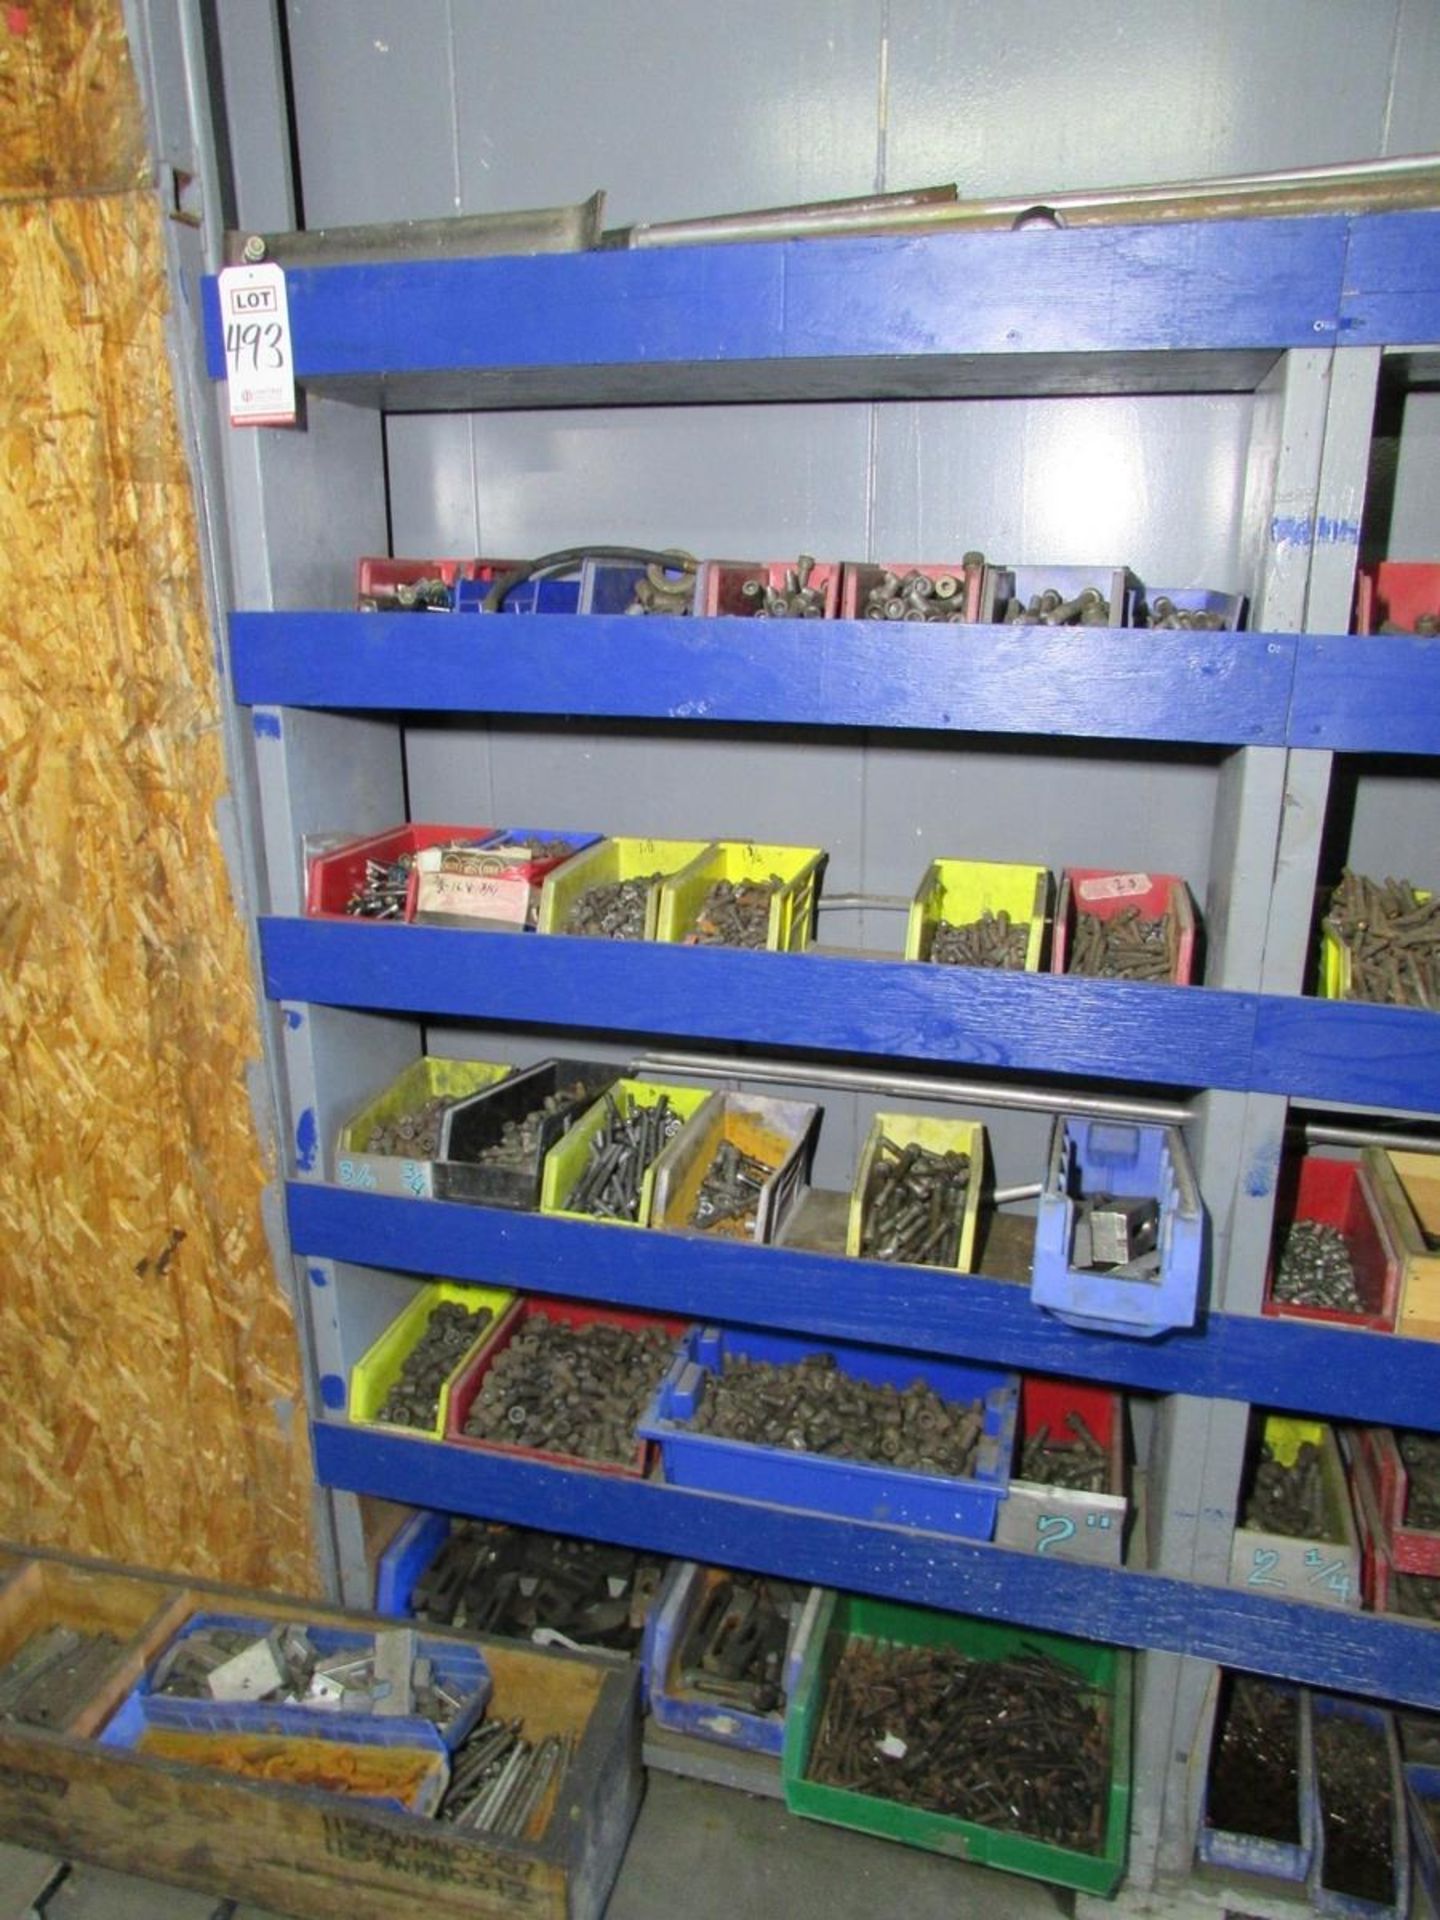 LOT - (10) SHELVING UNITS, W/ MISC. CONTENTS: LARGE ASSORTMENT OF HARDWARE, NUTS, BOLTS, FITTINGS, - Image 5 of 17